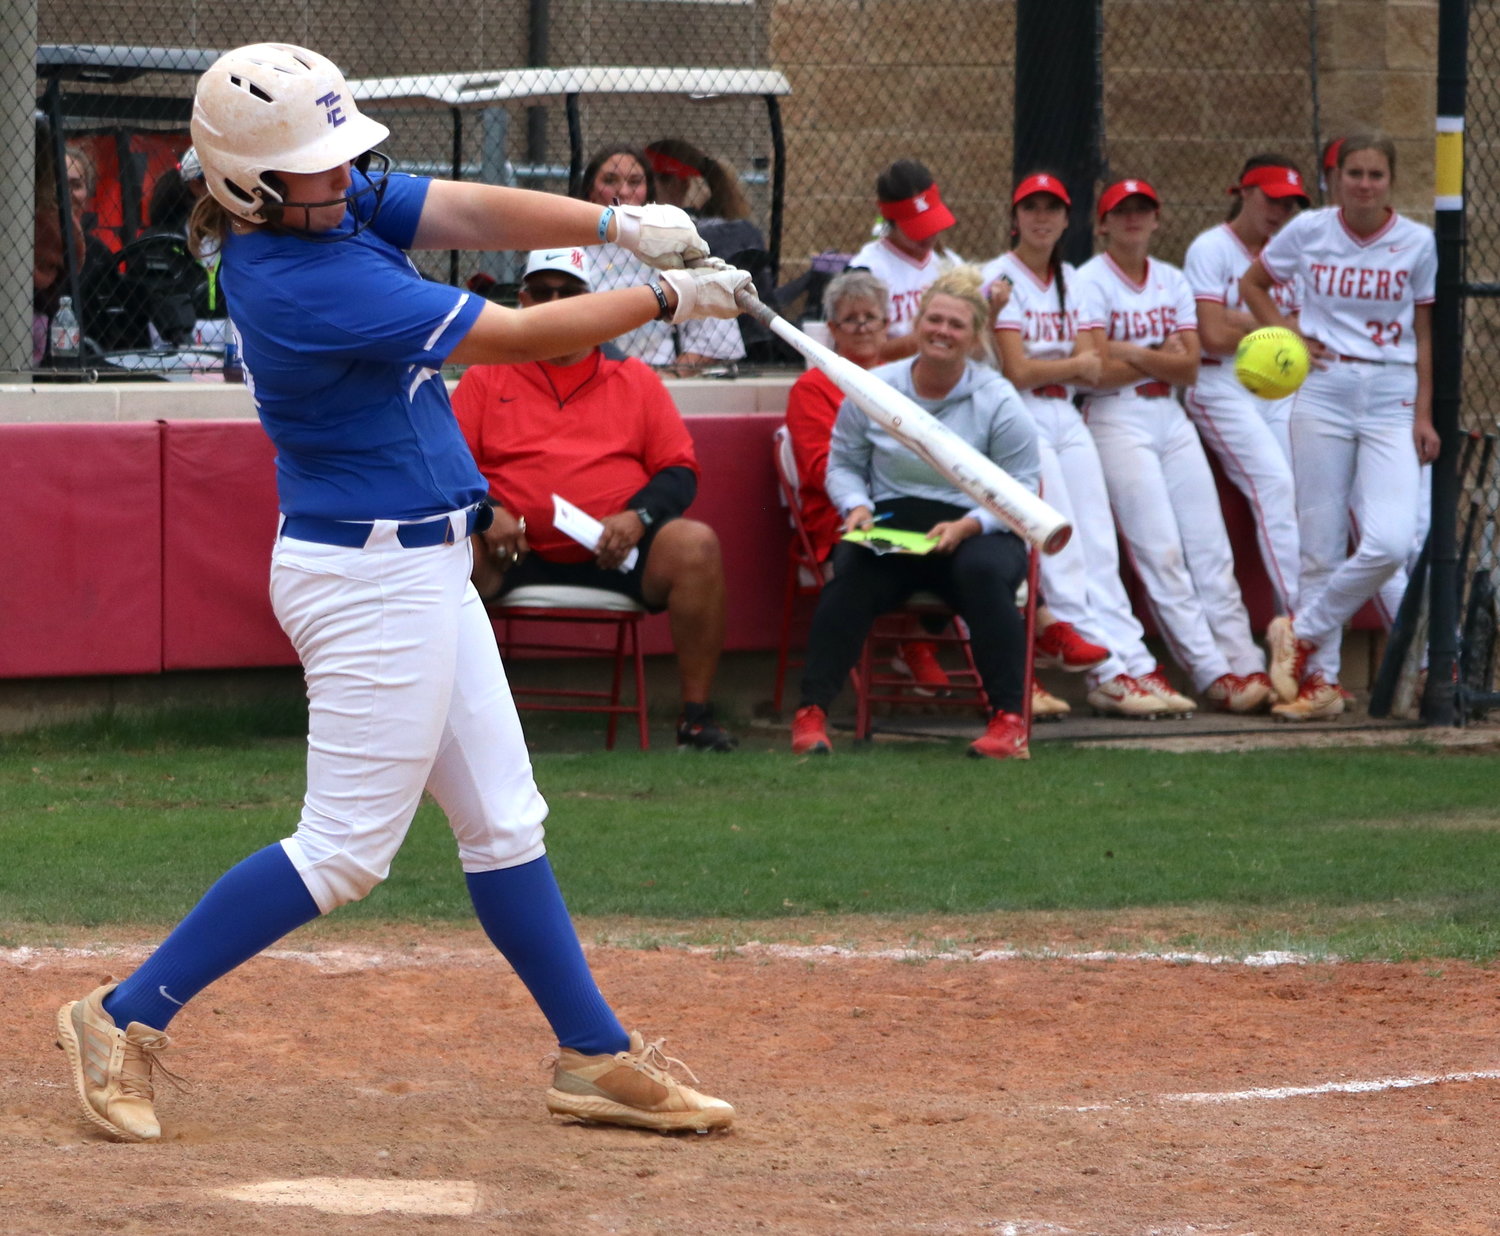 Katelyn Wentzler hits during Tuesday’s game between Katy and Taylor at the Katy softball field.